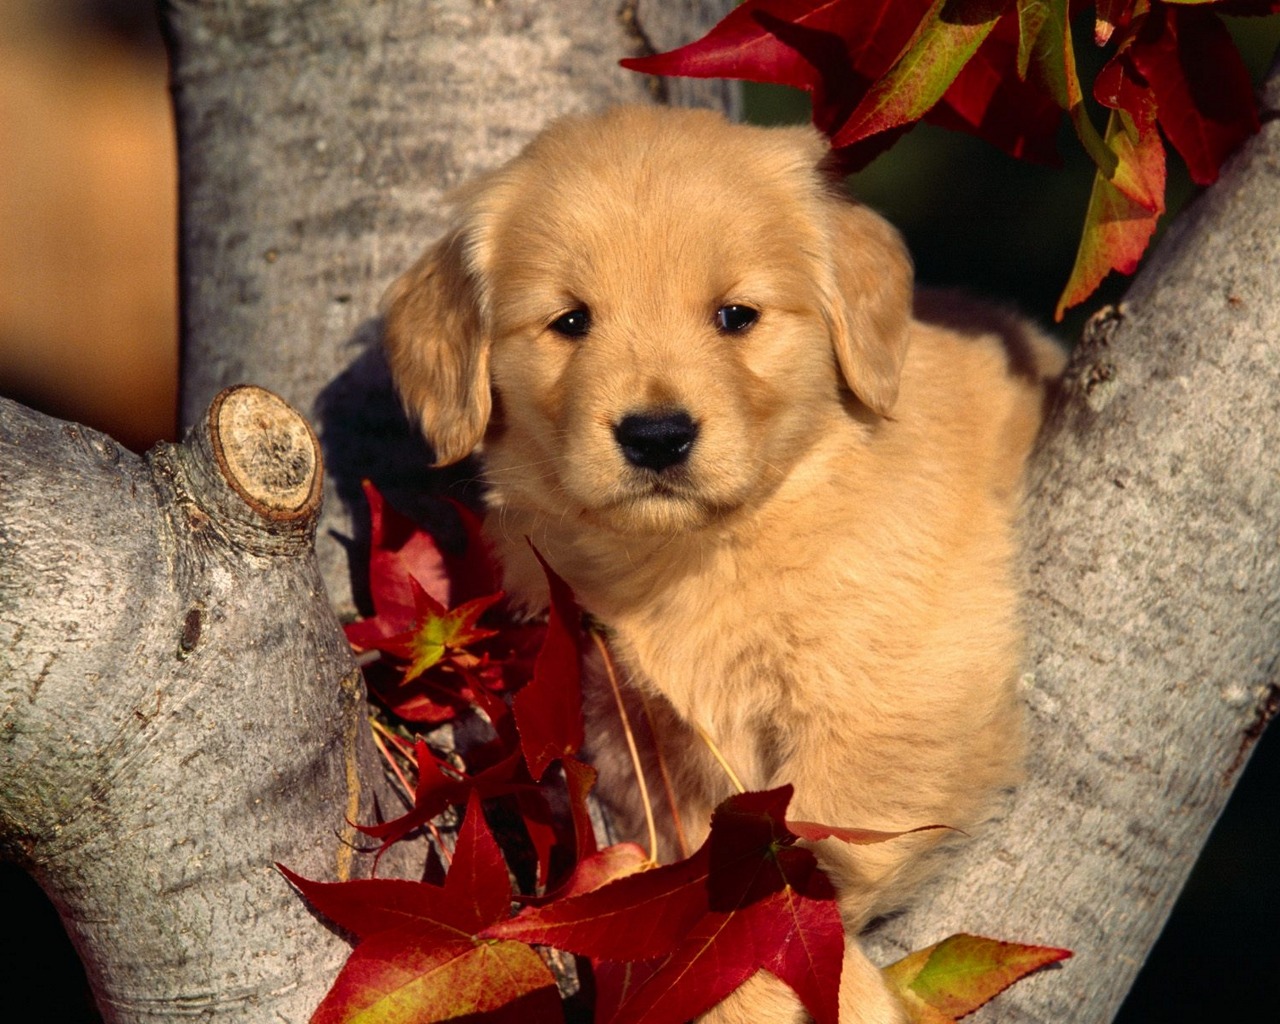  Cute Dog on Tree Wallpaper on this Dogs Wallpapers Backgrounds website